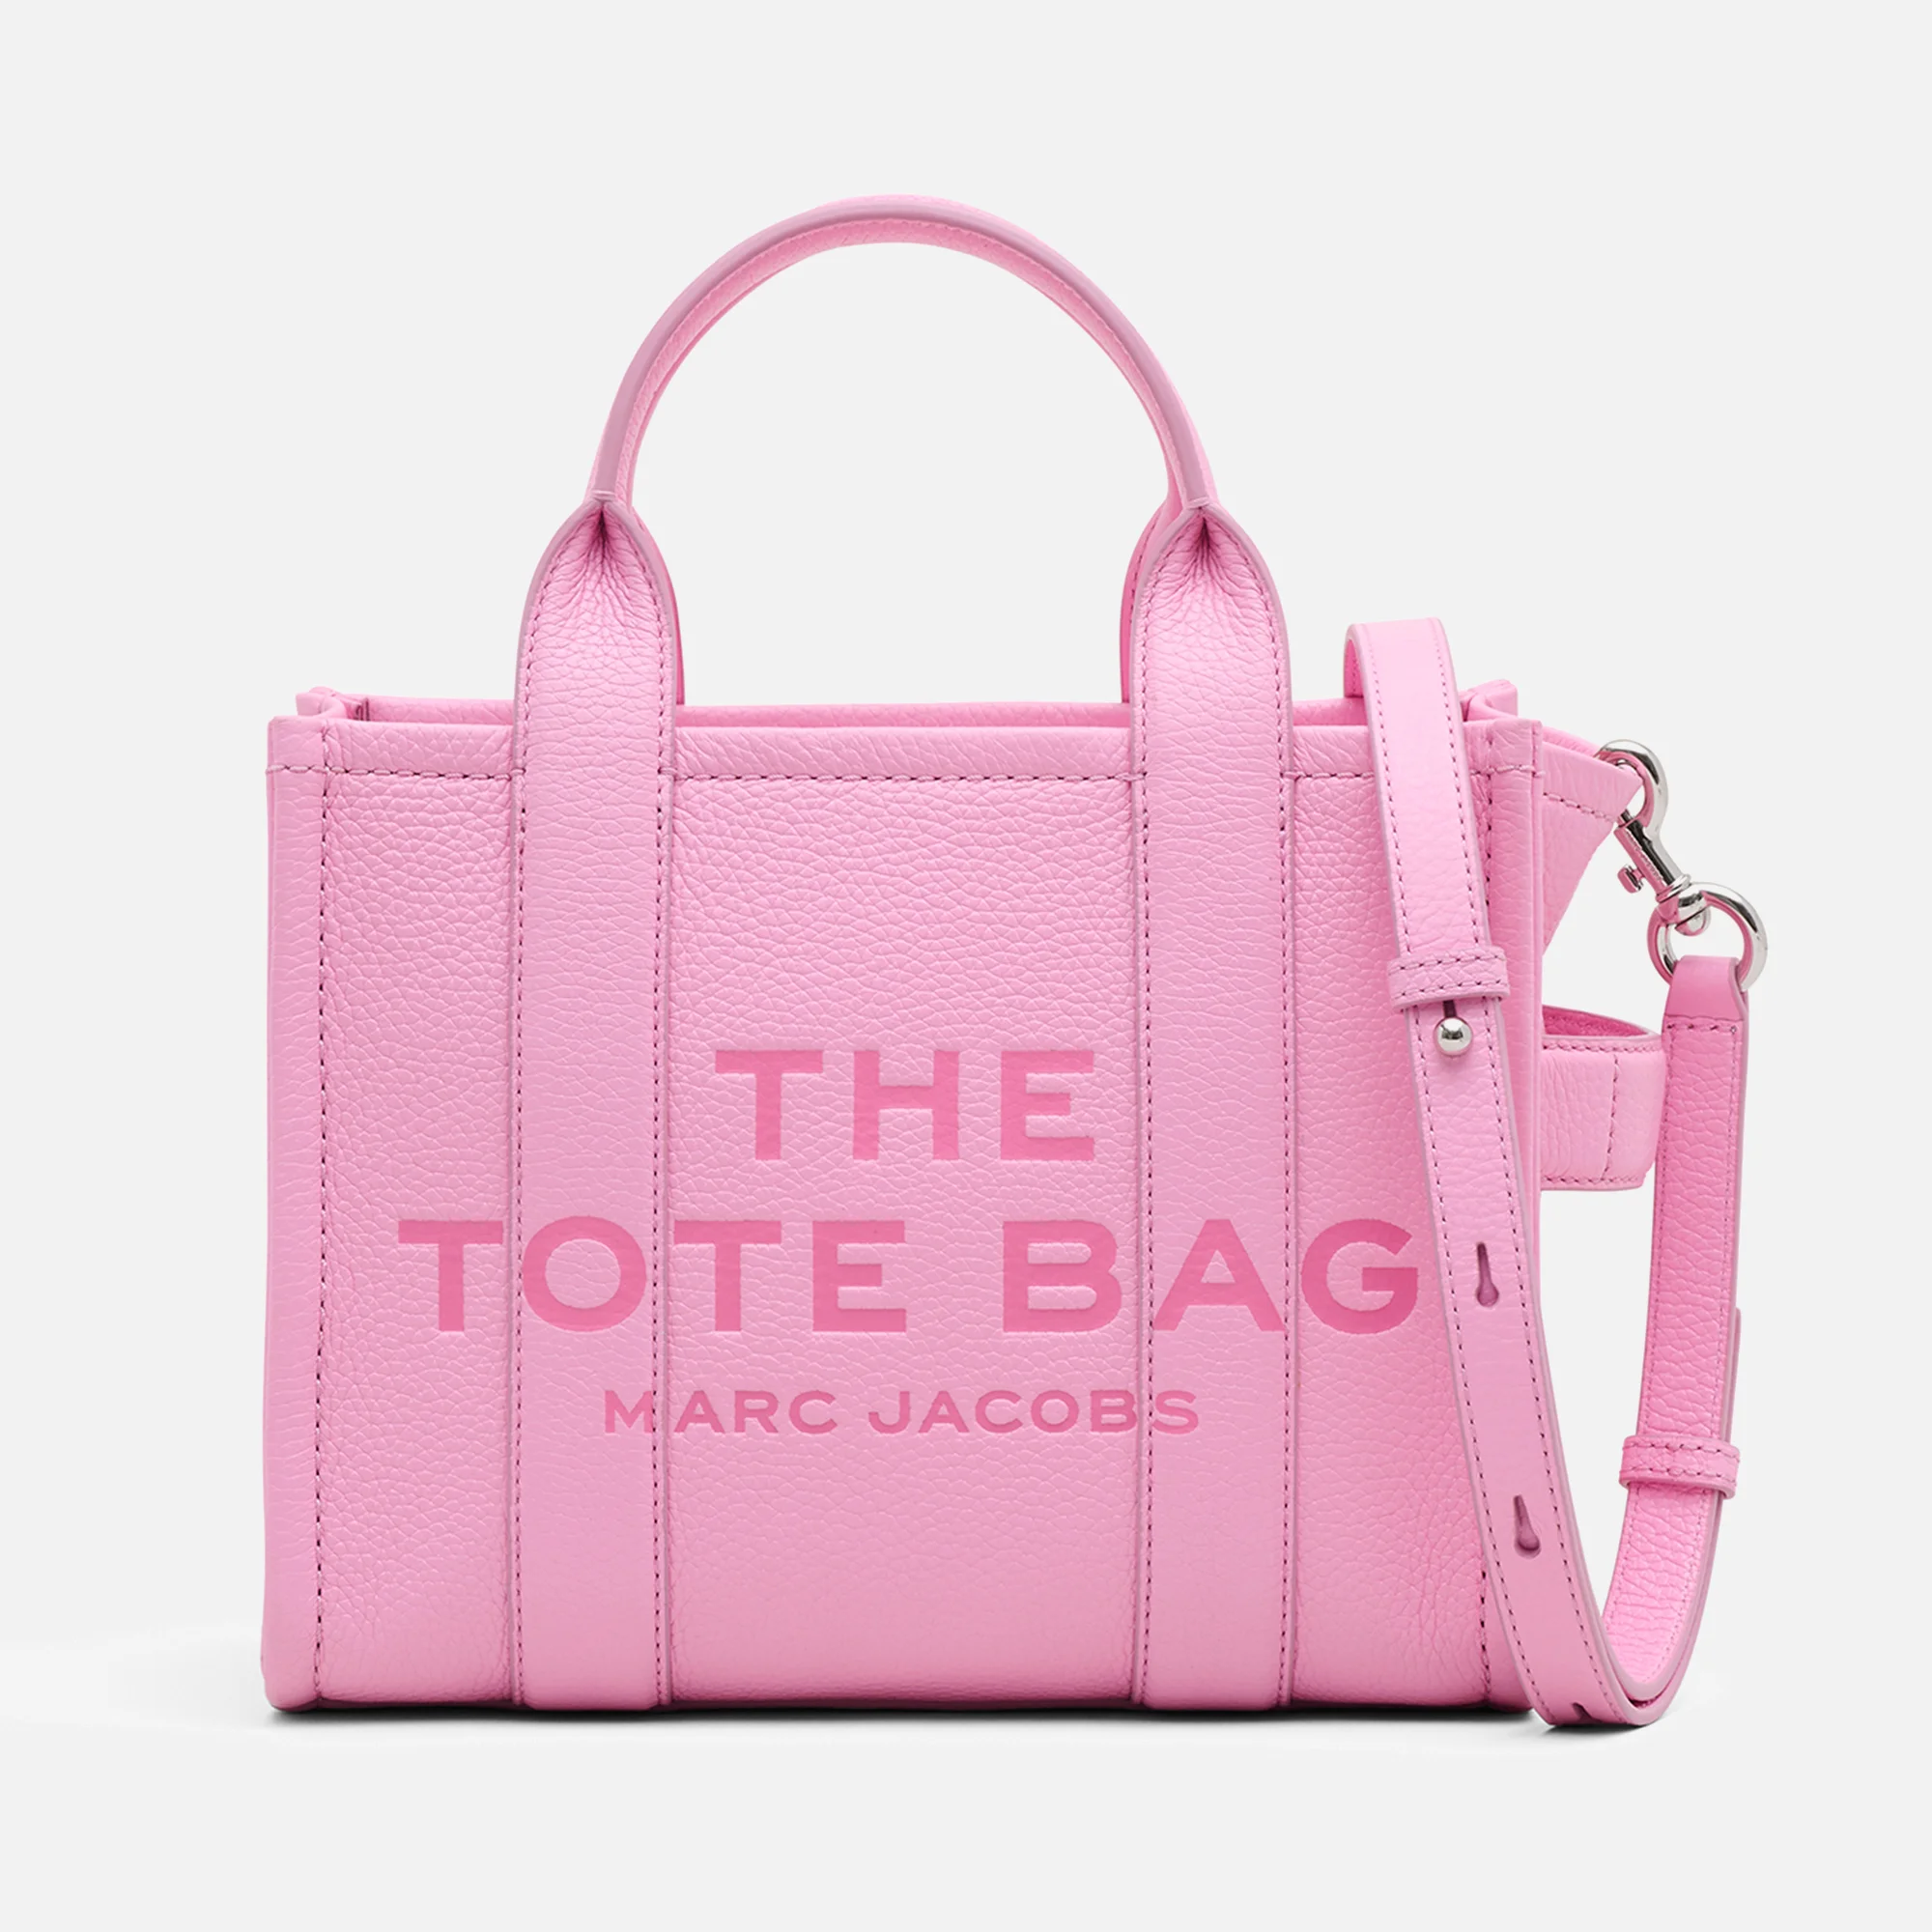 Marc Jacobs The Small Leather Tote Bag Image 1